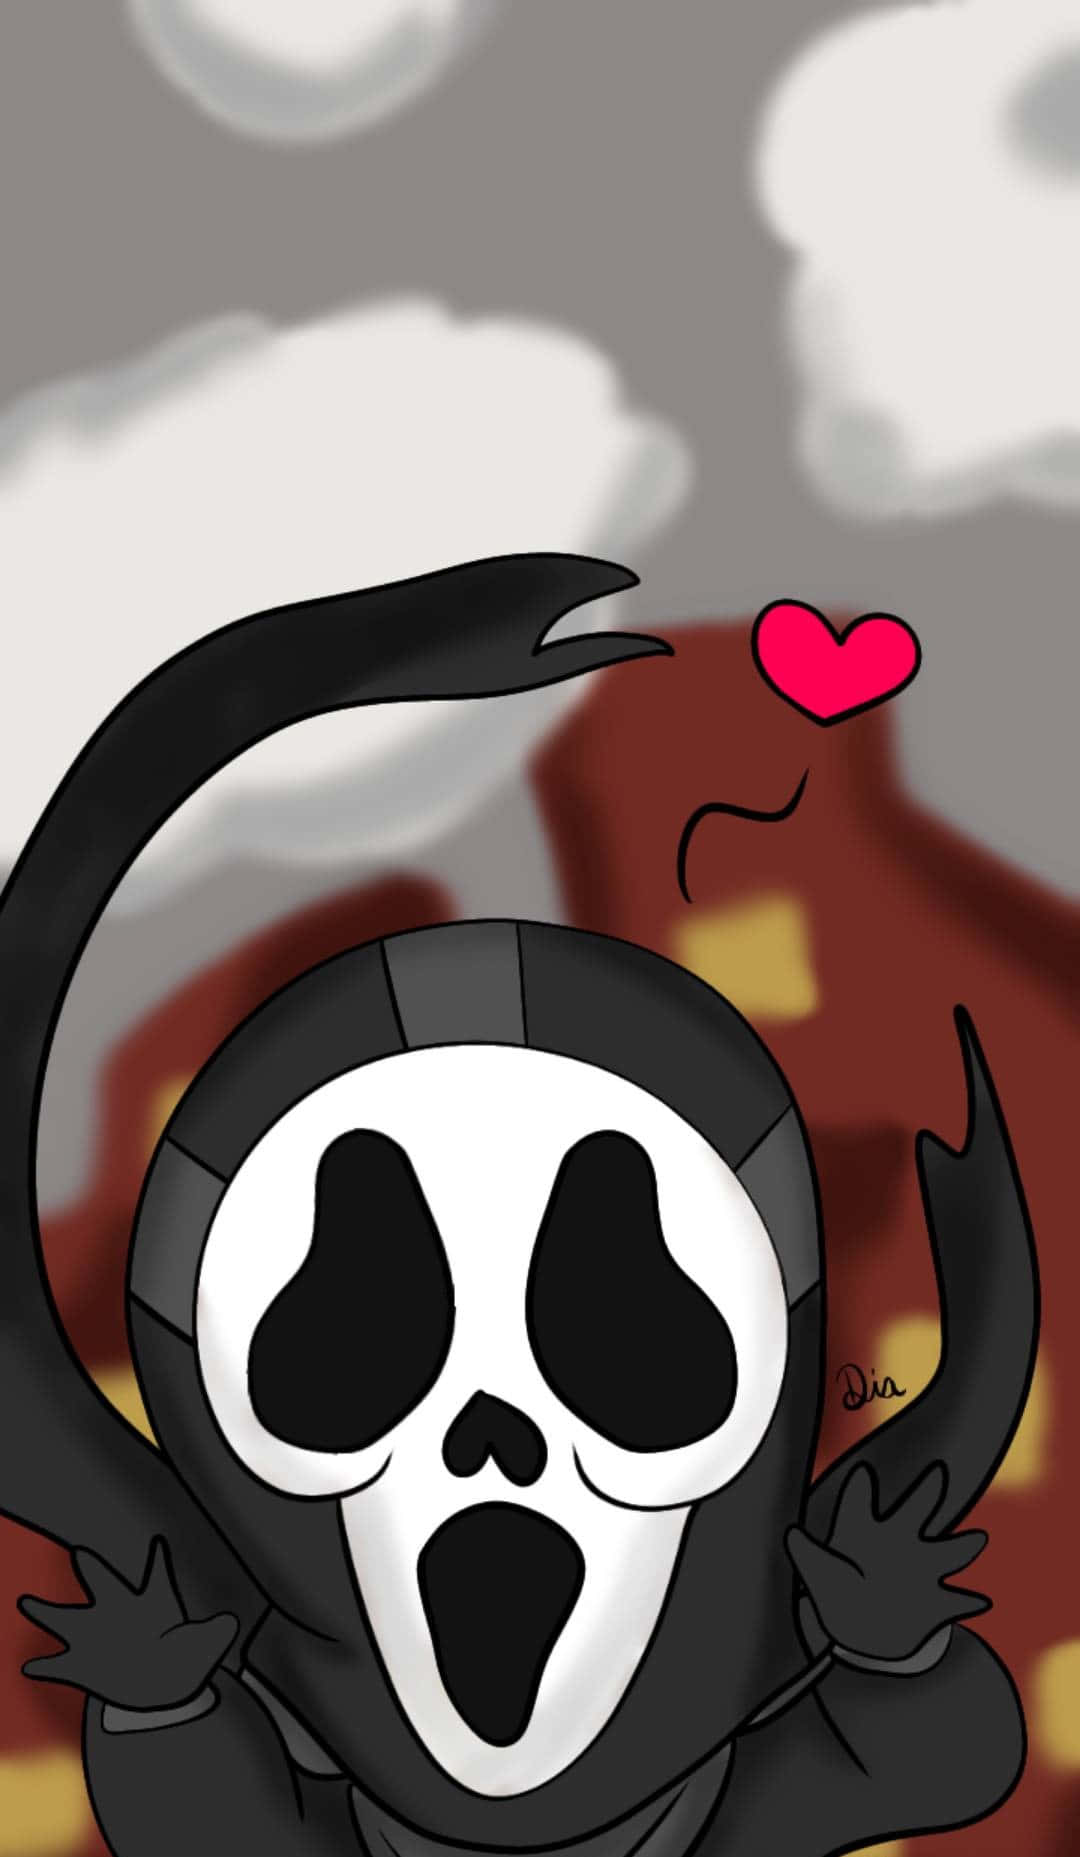 Cute Ghostface Small Version With Heart Wallpaper